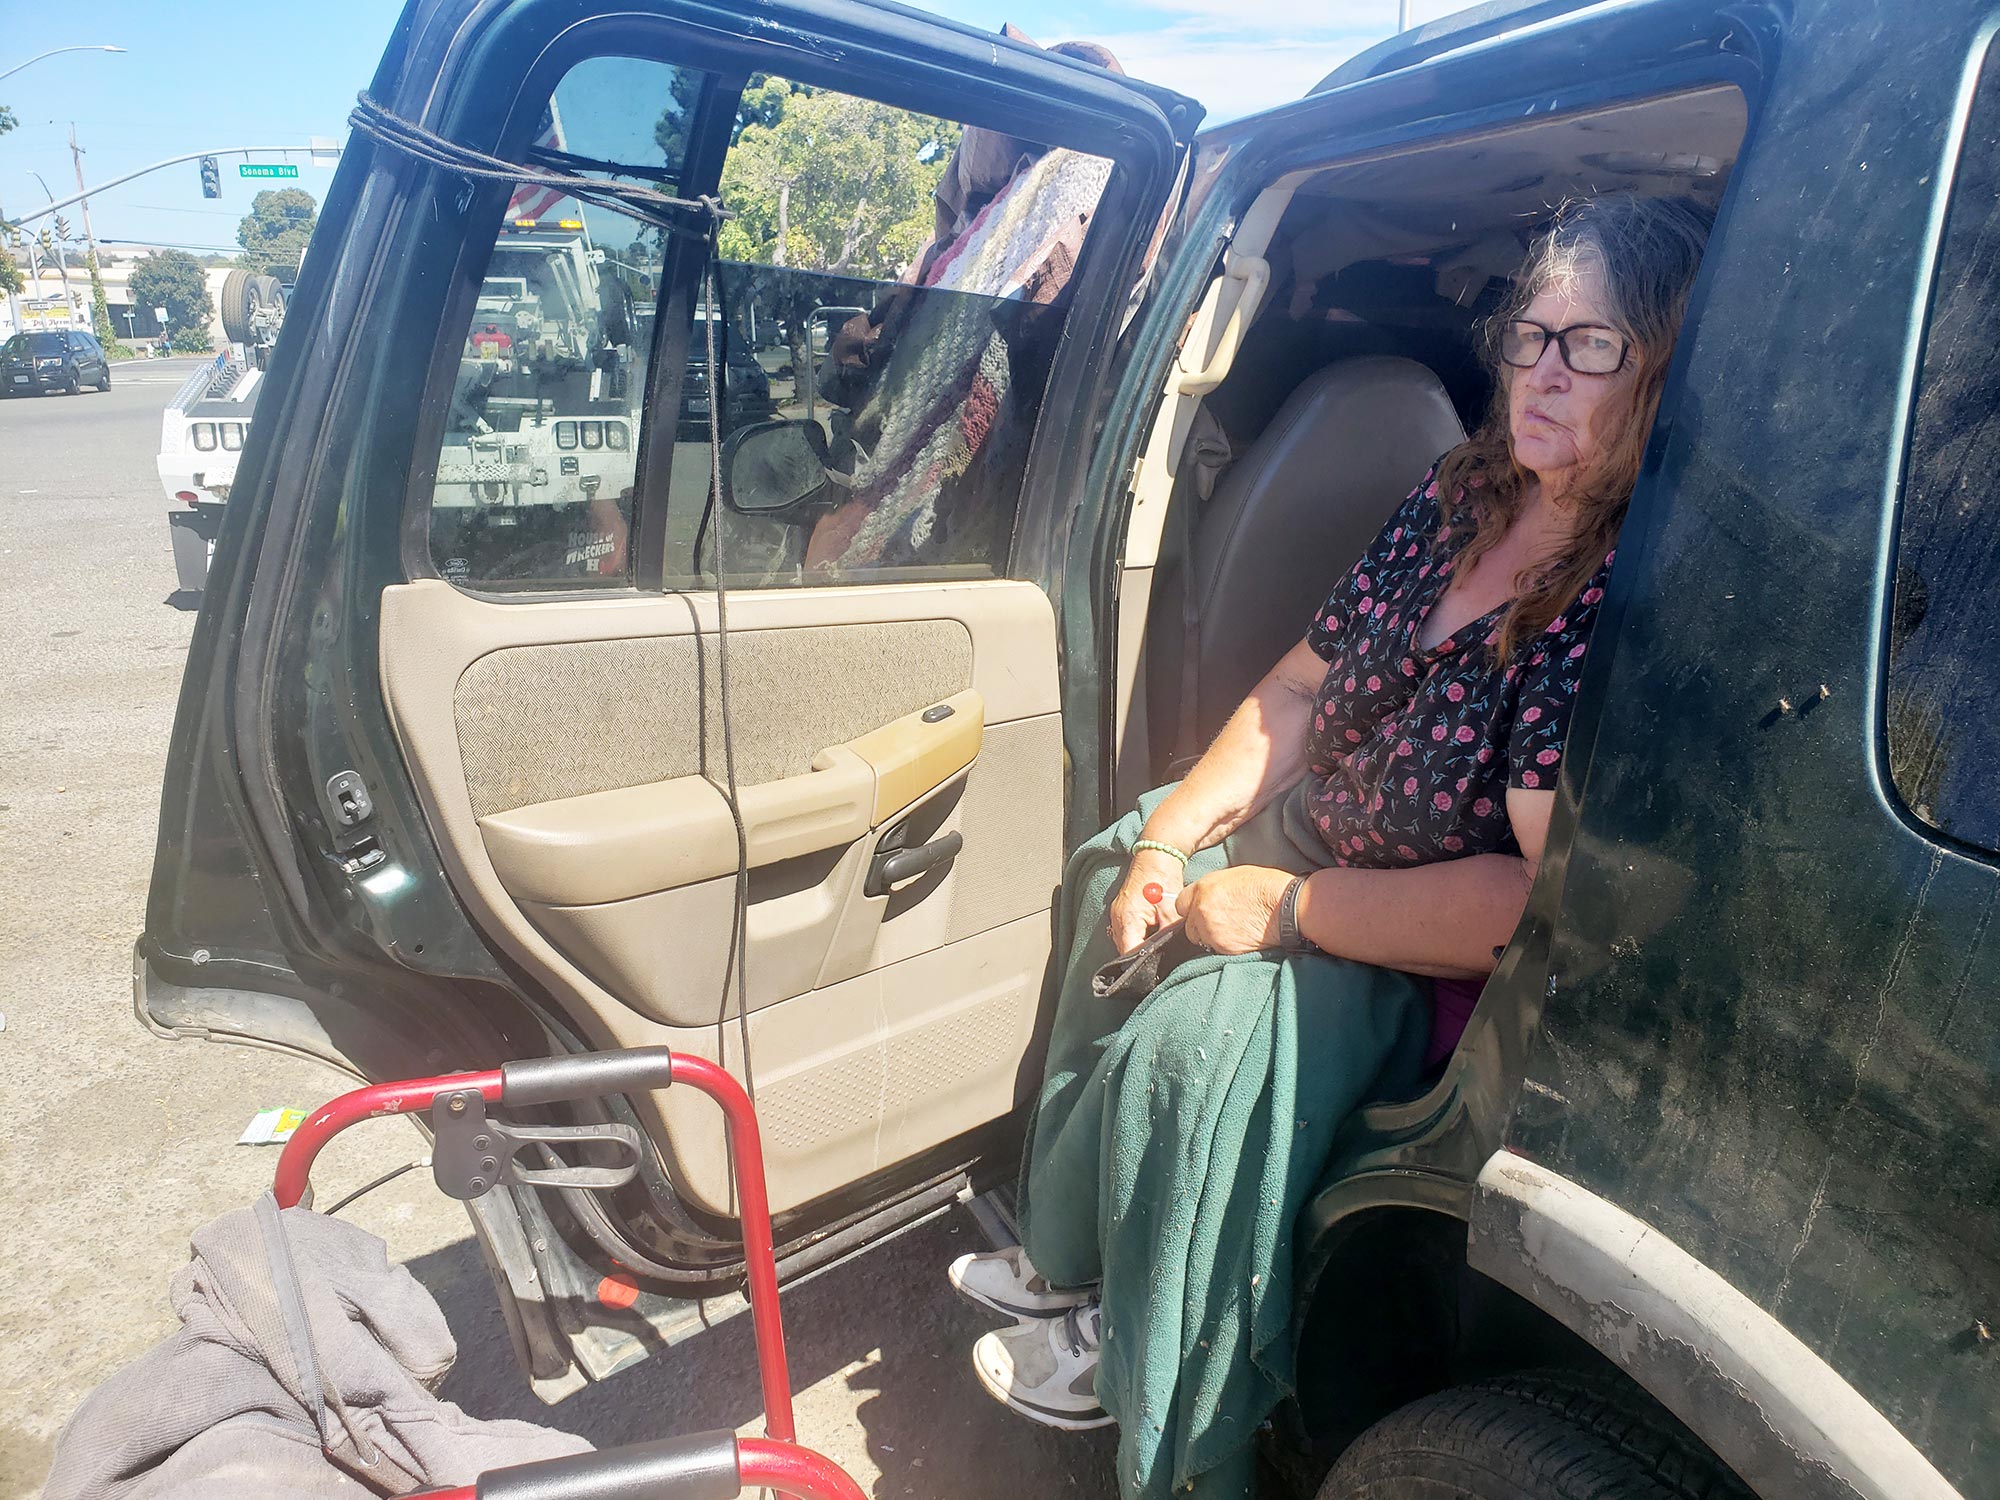 Christine Hoffman was still in her vehicle when Vallejo police attempted to tow it on Monday.